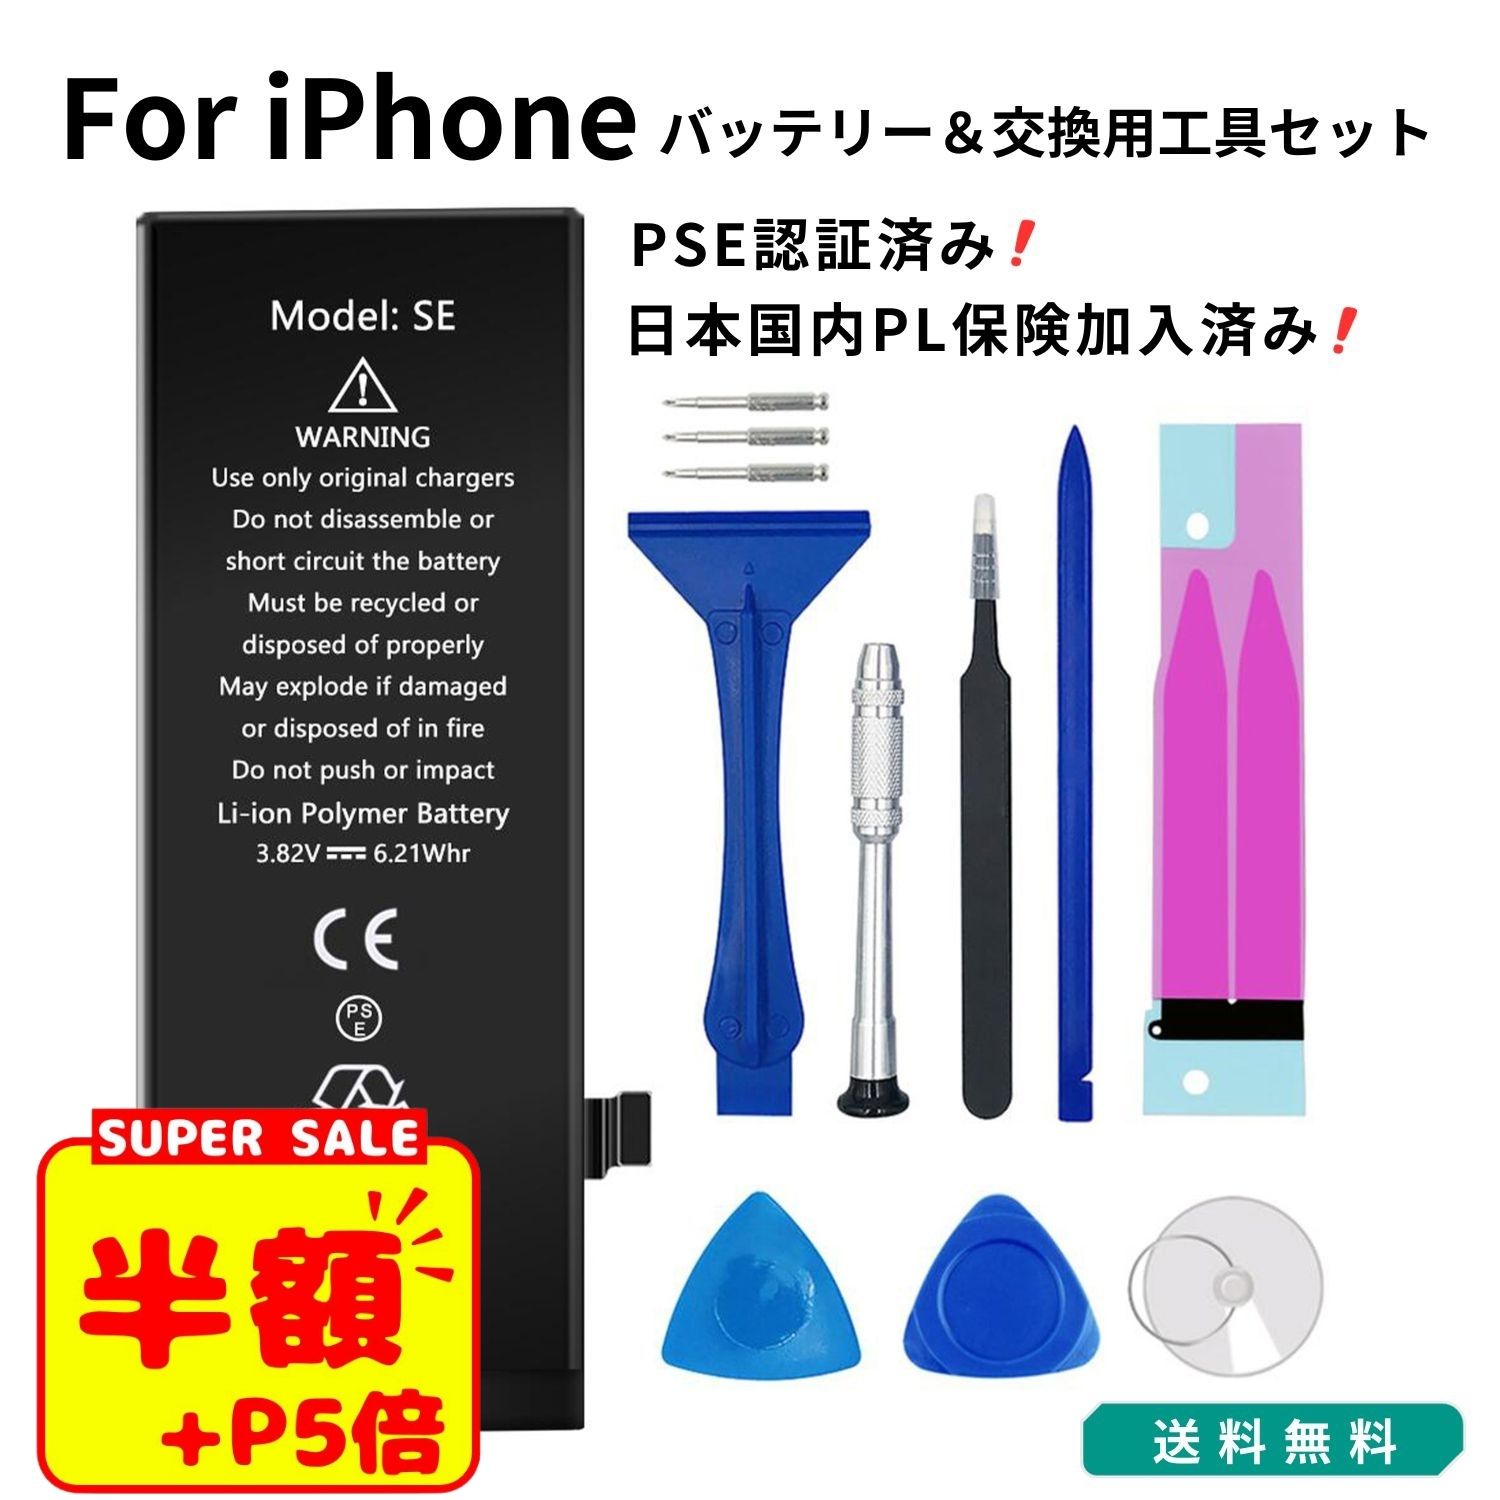 スーパーSALE【100円OFF+P5倍】【PSE認証済】iphone バッテリー 交換キット 互換バッテリー 電池交換 30日間保証 iphone5 iphone5c iphone5s iphone6 iphone6s iphone6p iphone6sp iphone7 iph…